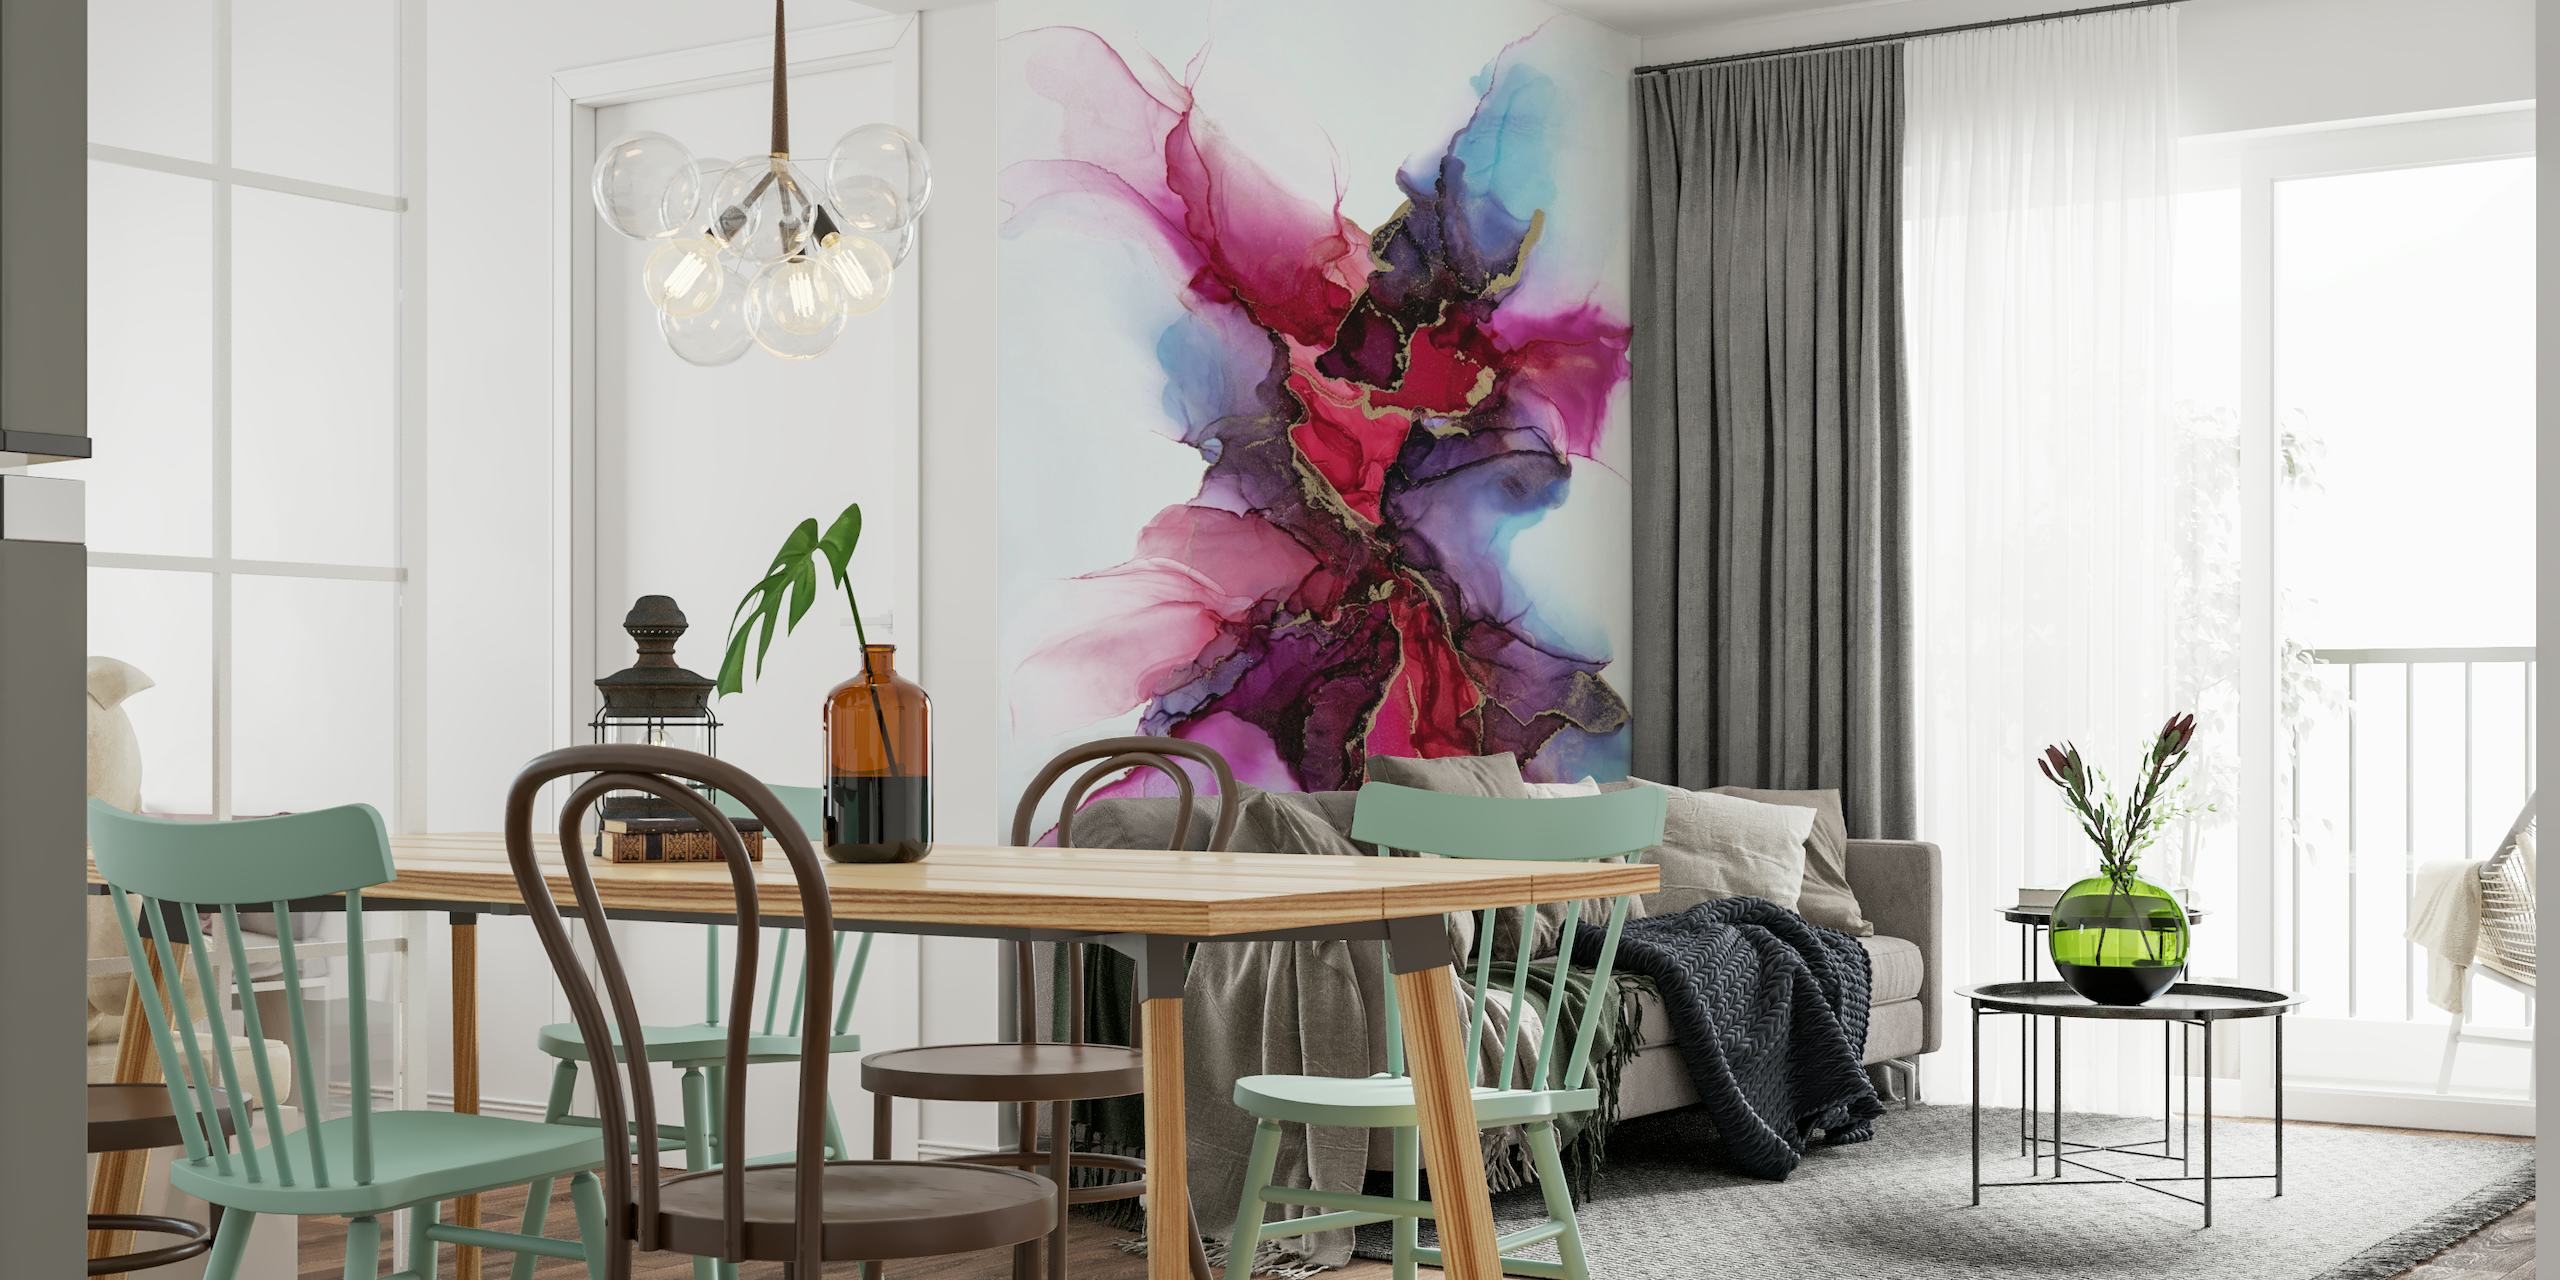 Abstract wall mural with vibrant magenta, purple, and blue inkblot design